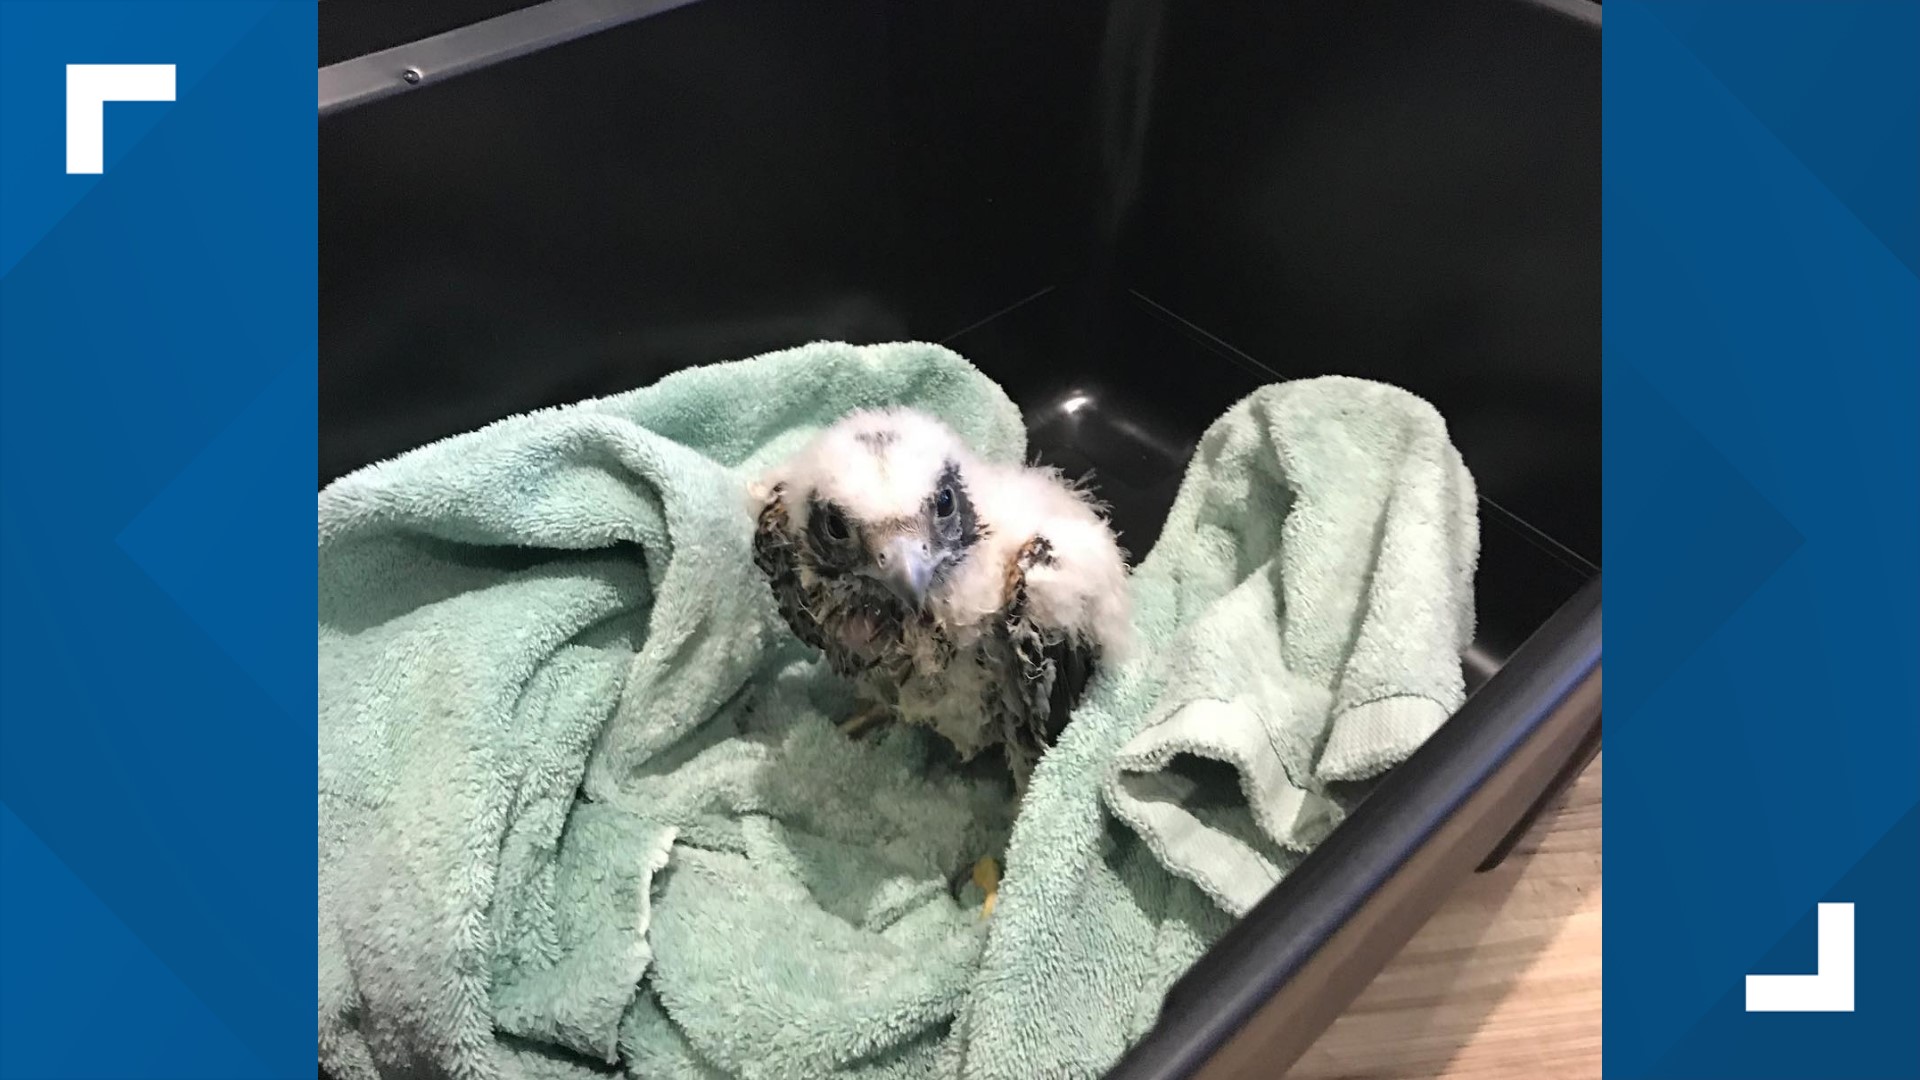 A relaxing day on Lake Pleasant in Arizona turned into a rescue mission for a Valley woman and a baby hawk who fell into the water. Hear her story of the rescue.